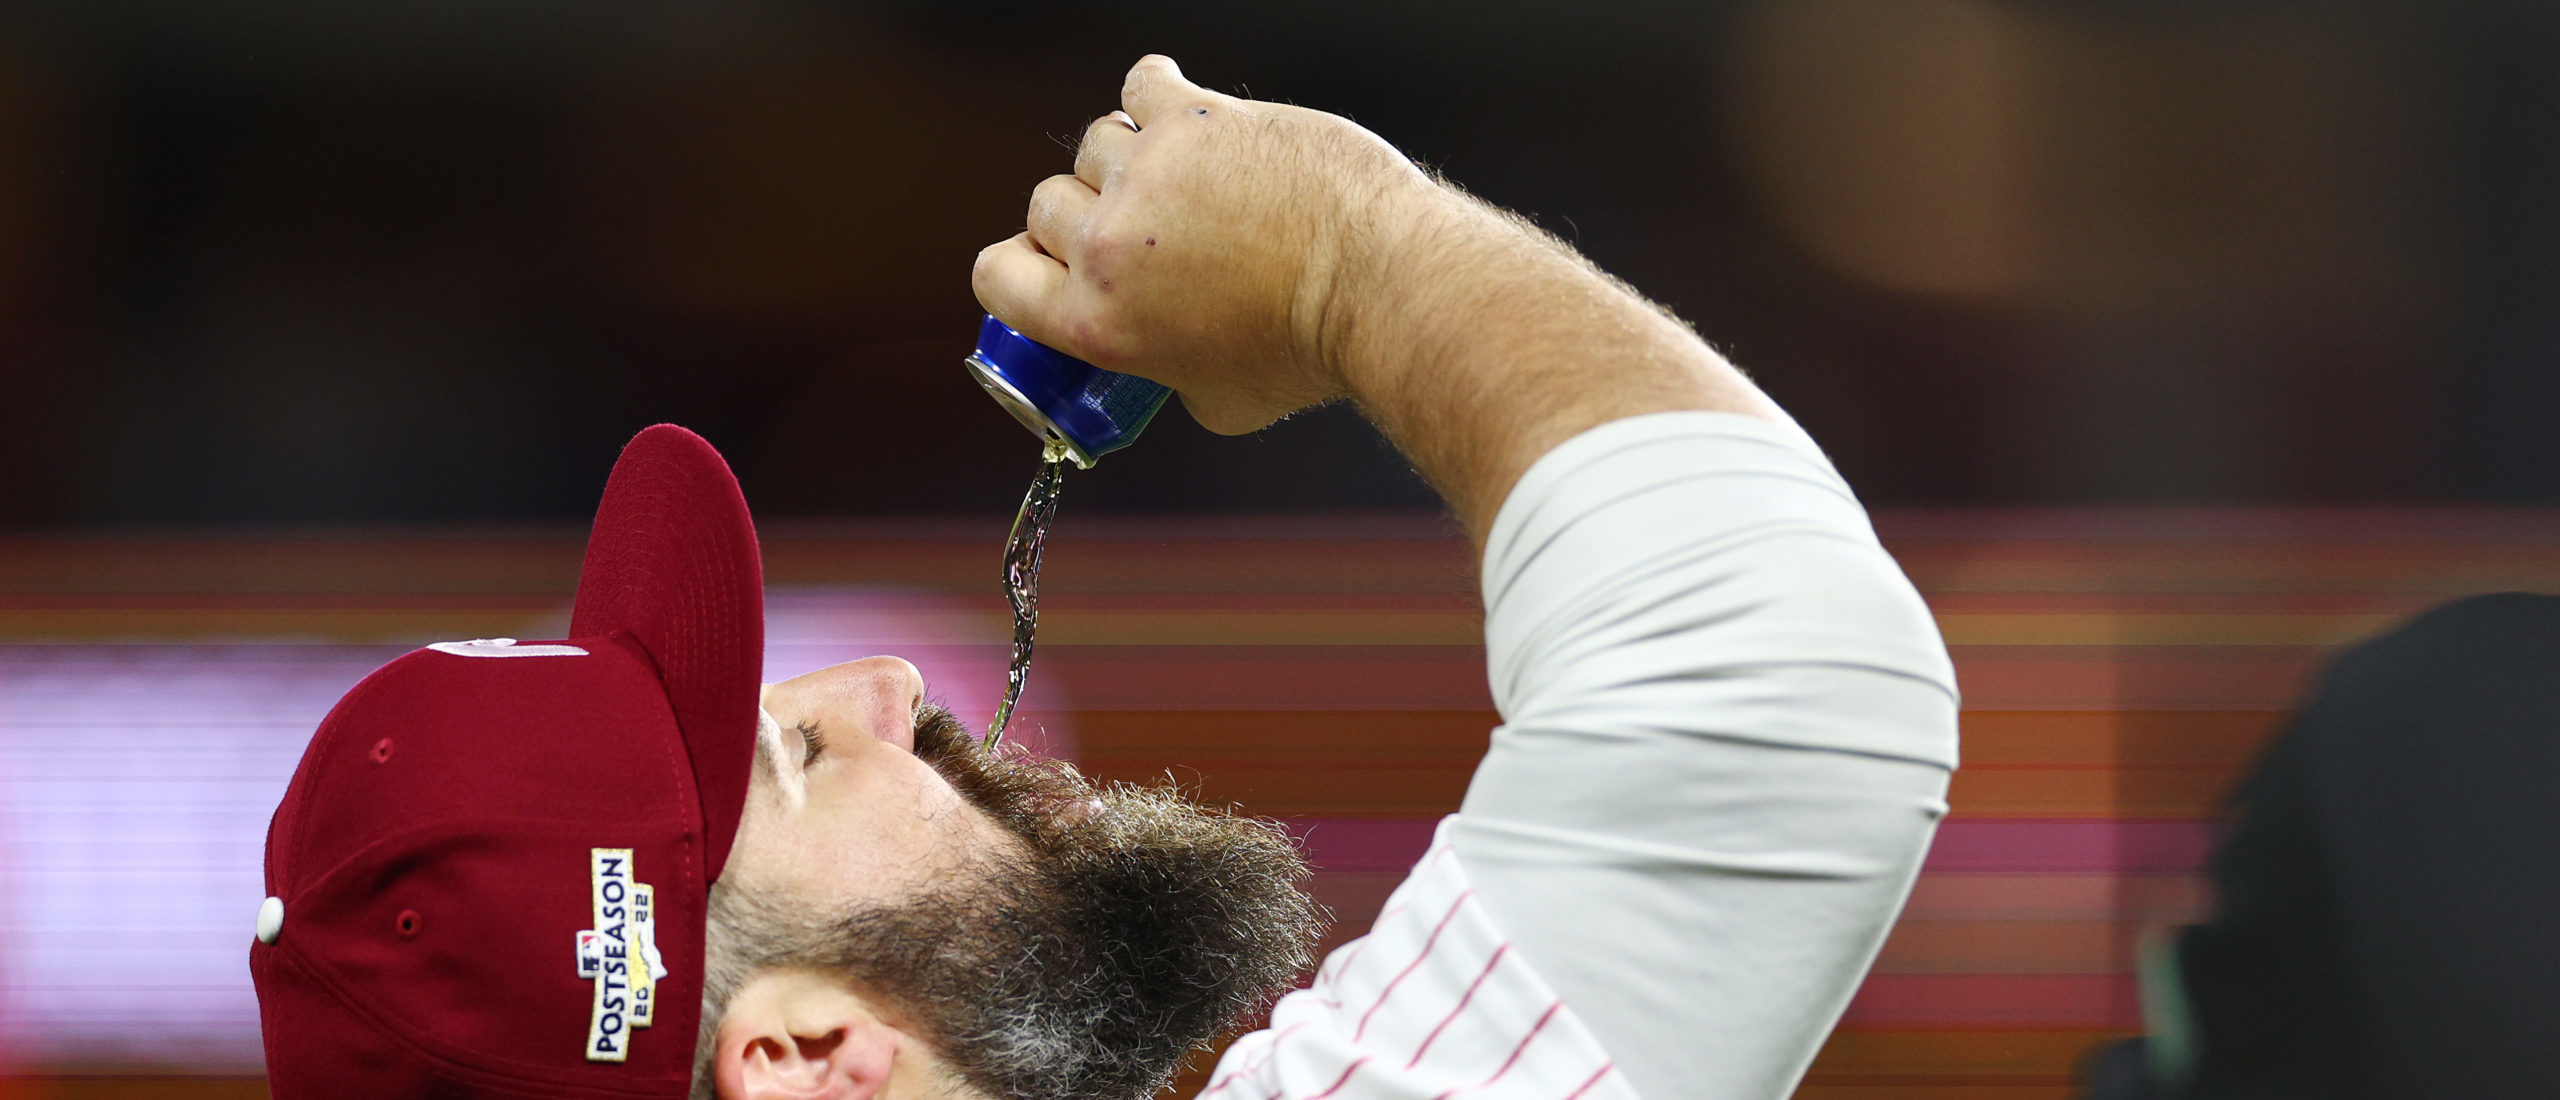 PHILADELPHIA, PENNSYLVANIA - OCTOBER 21: Philadelphia Eagles player Jason Kelce pumps drinks a beer during game three of the National League Championship Series between the San Diego Padres and the Philadelphia Phillies at Citizens Bank Park on October 21, 2022 in Philadelphia, Pennsylvania. (Photo by Elsa/Getty Images)